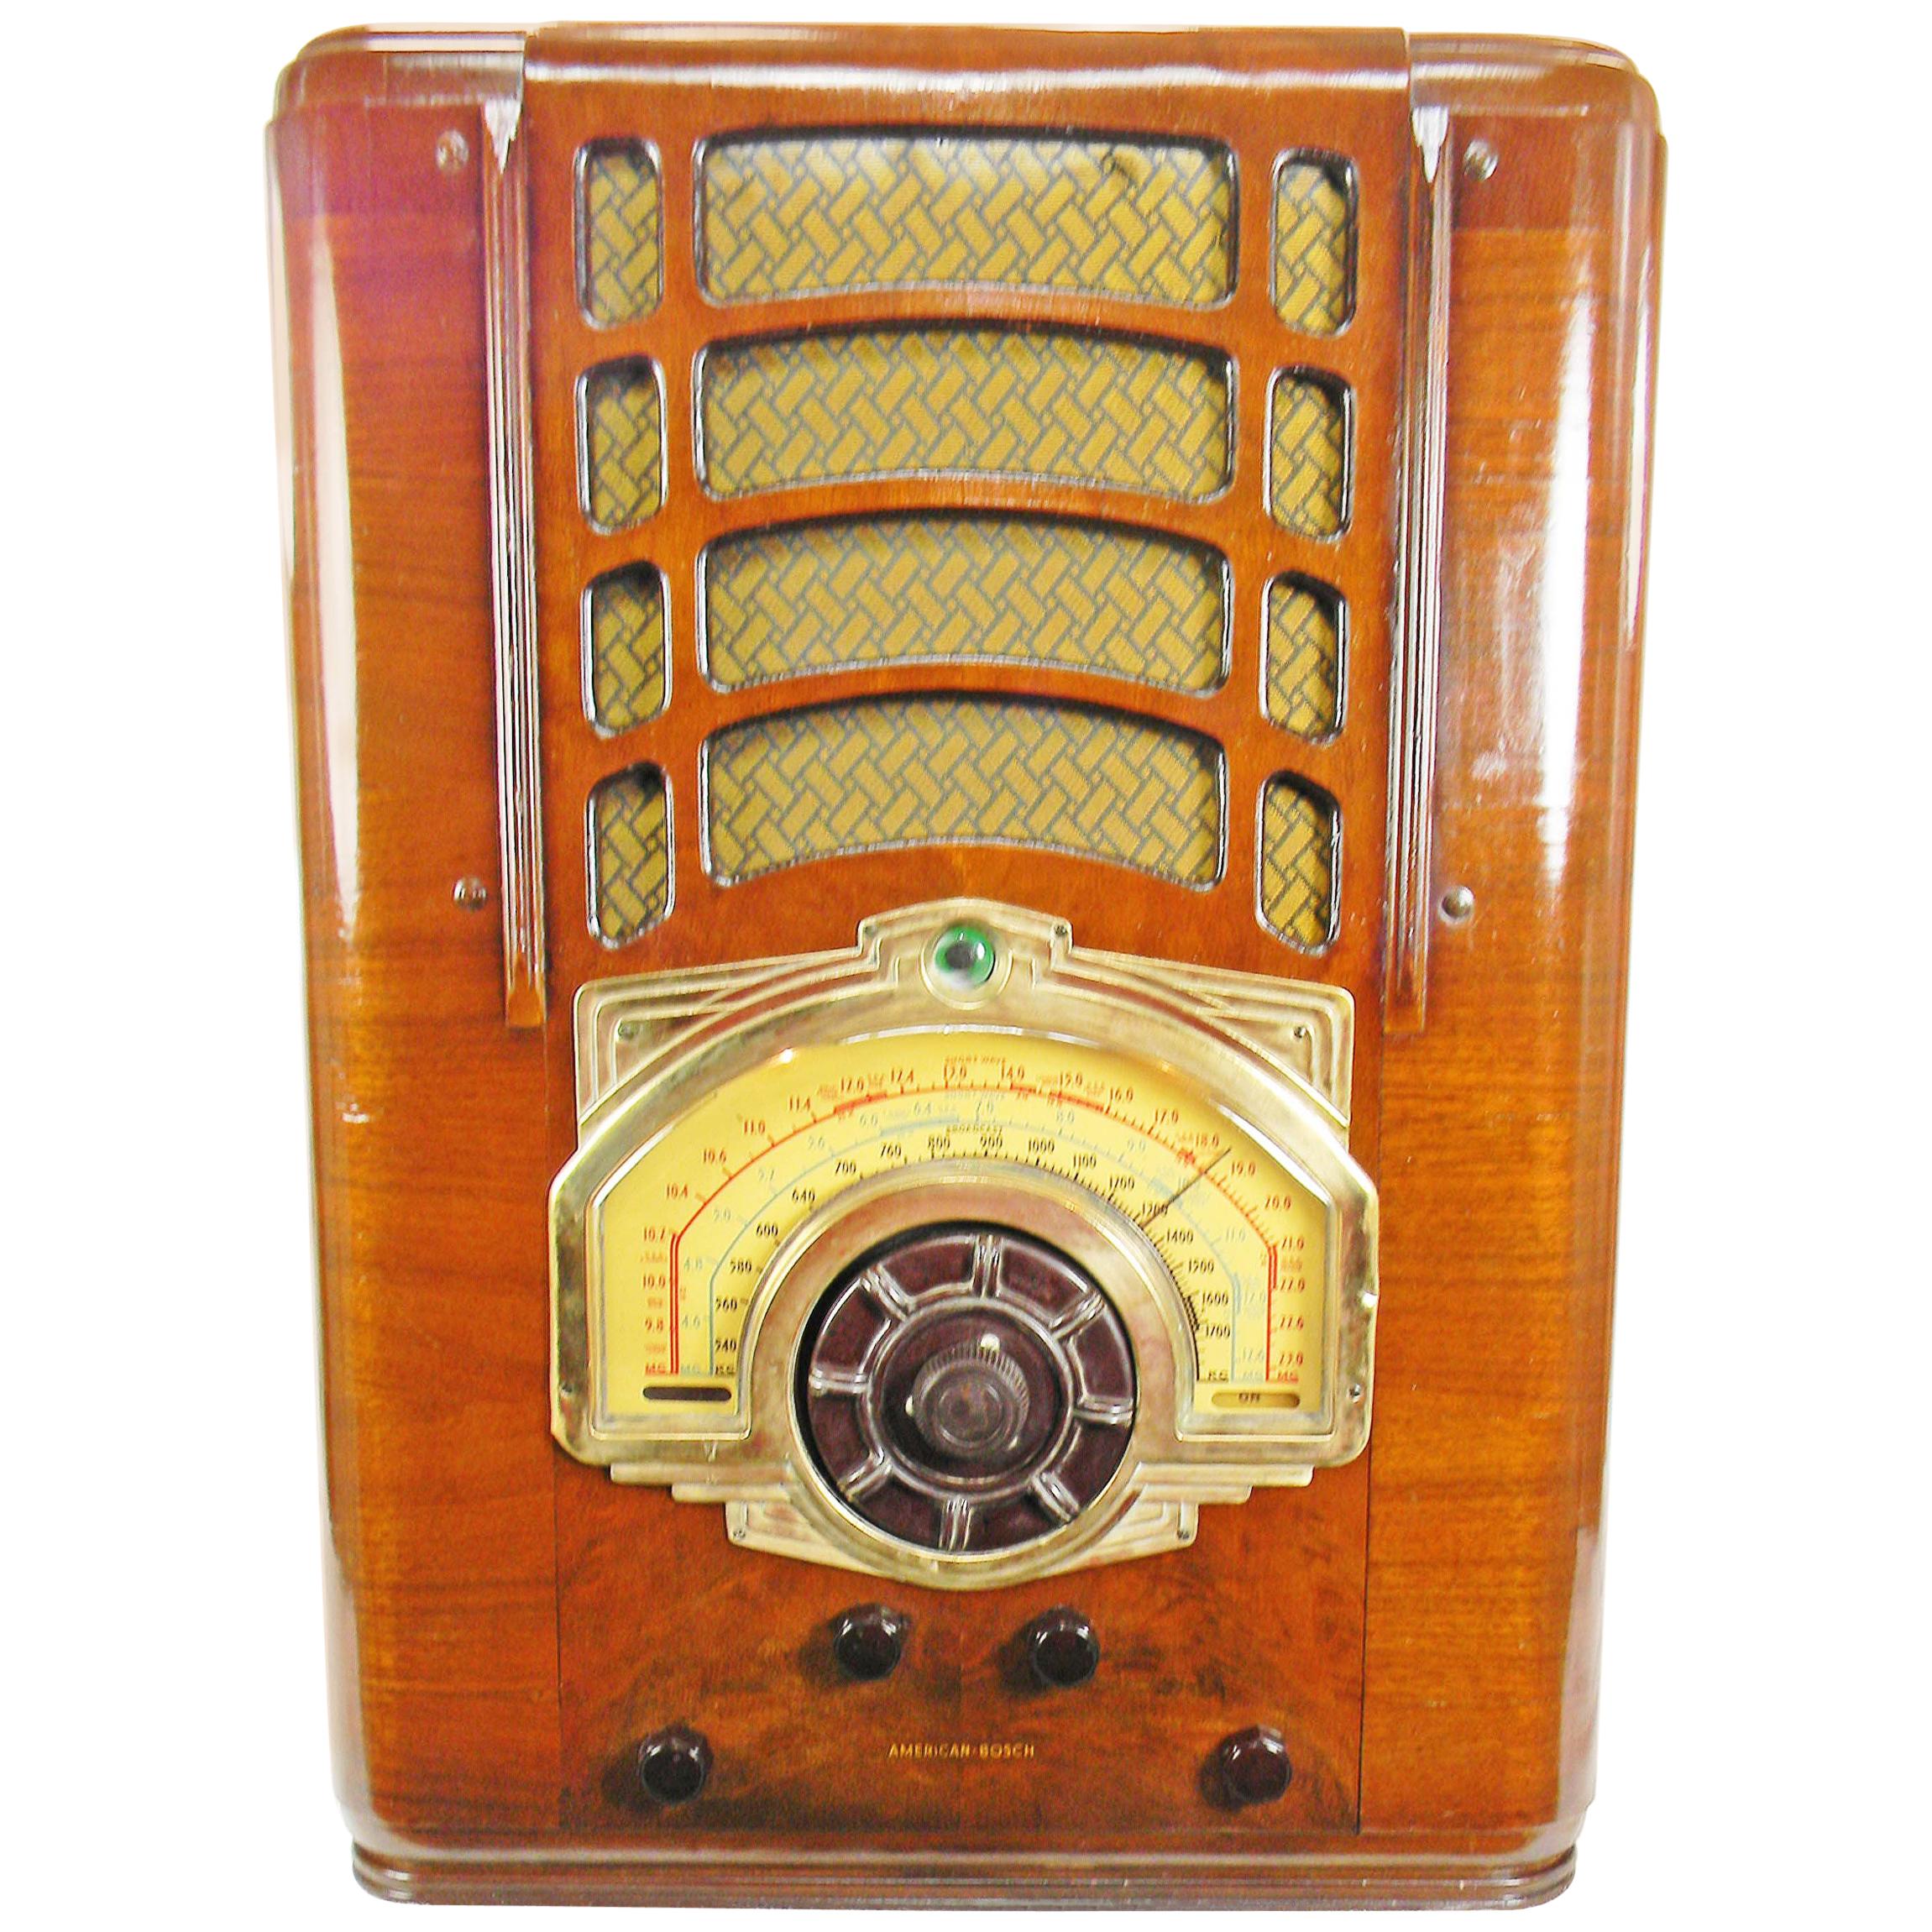 American Bosch Model 854T '1939' The Largest Tombstone Radio